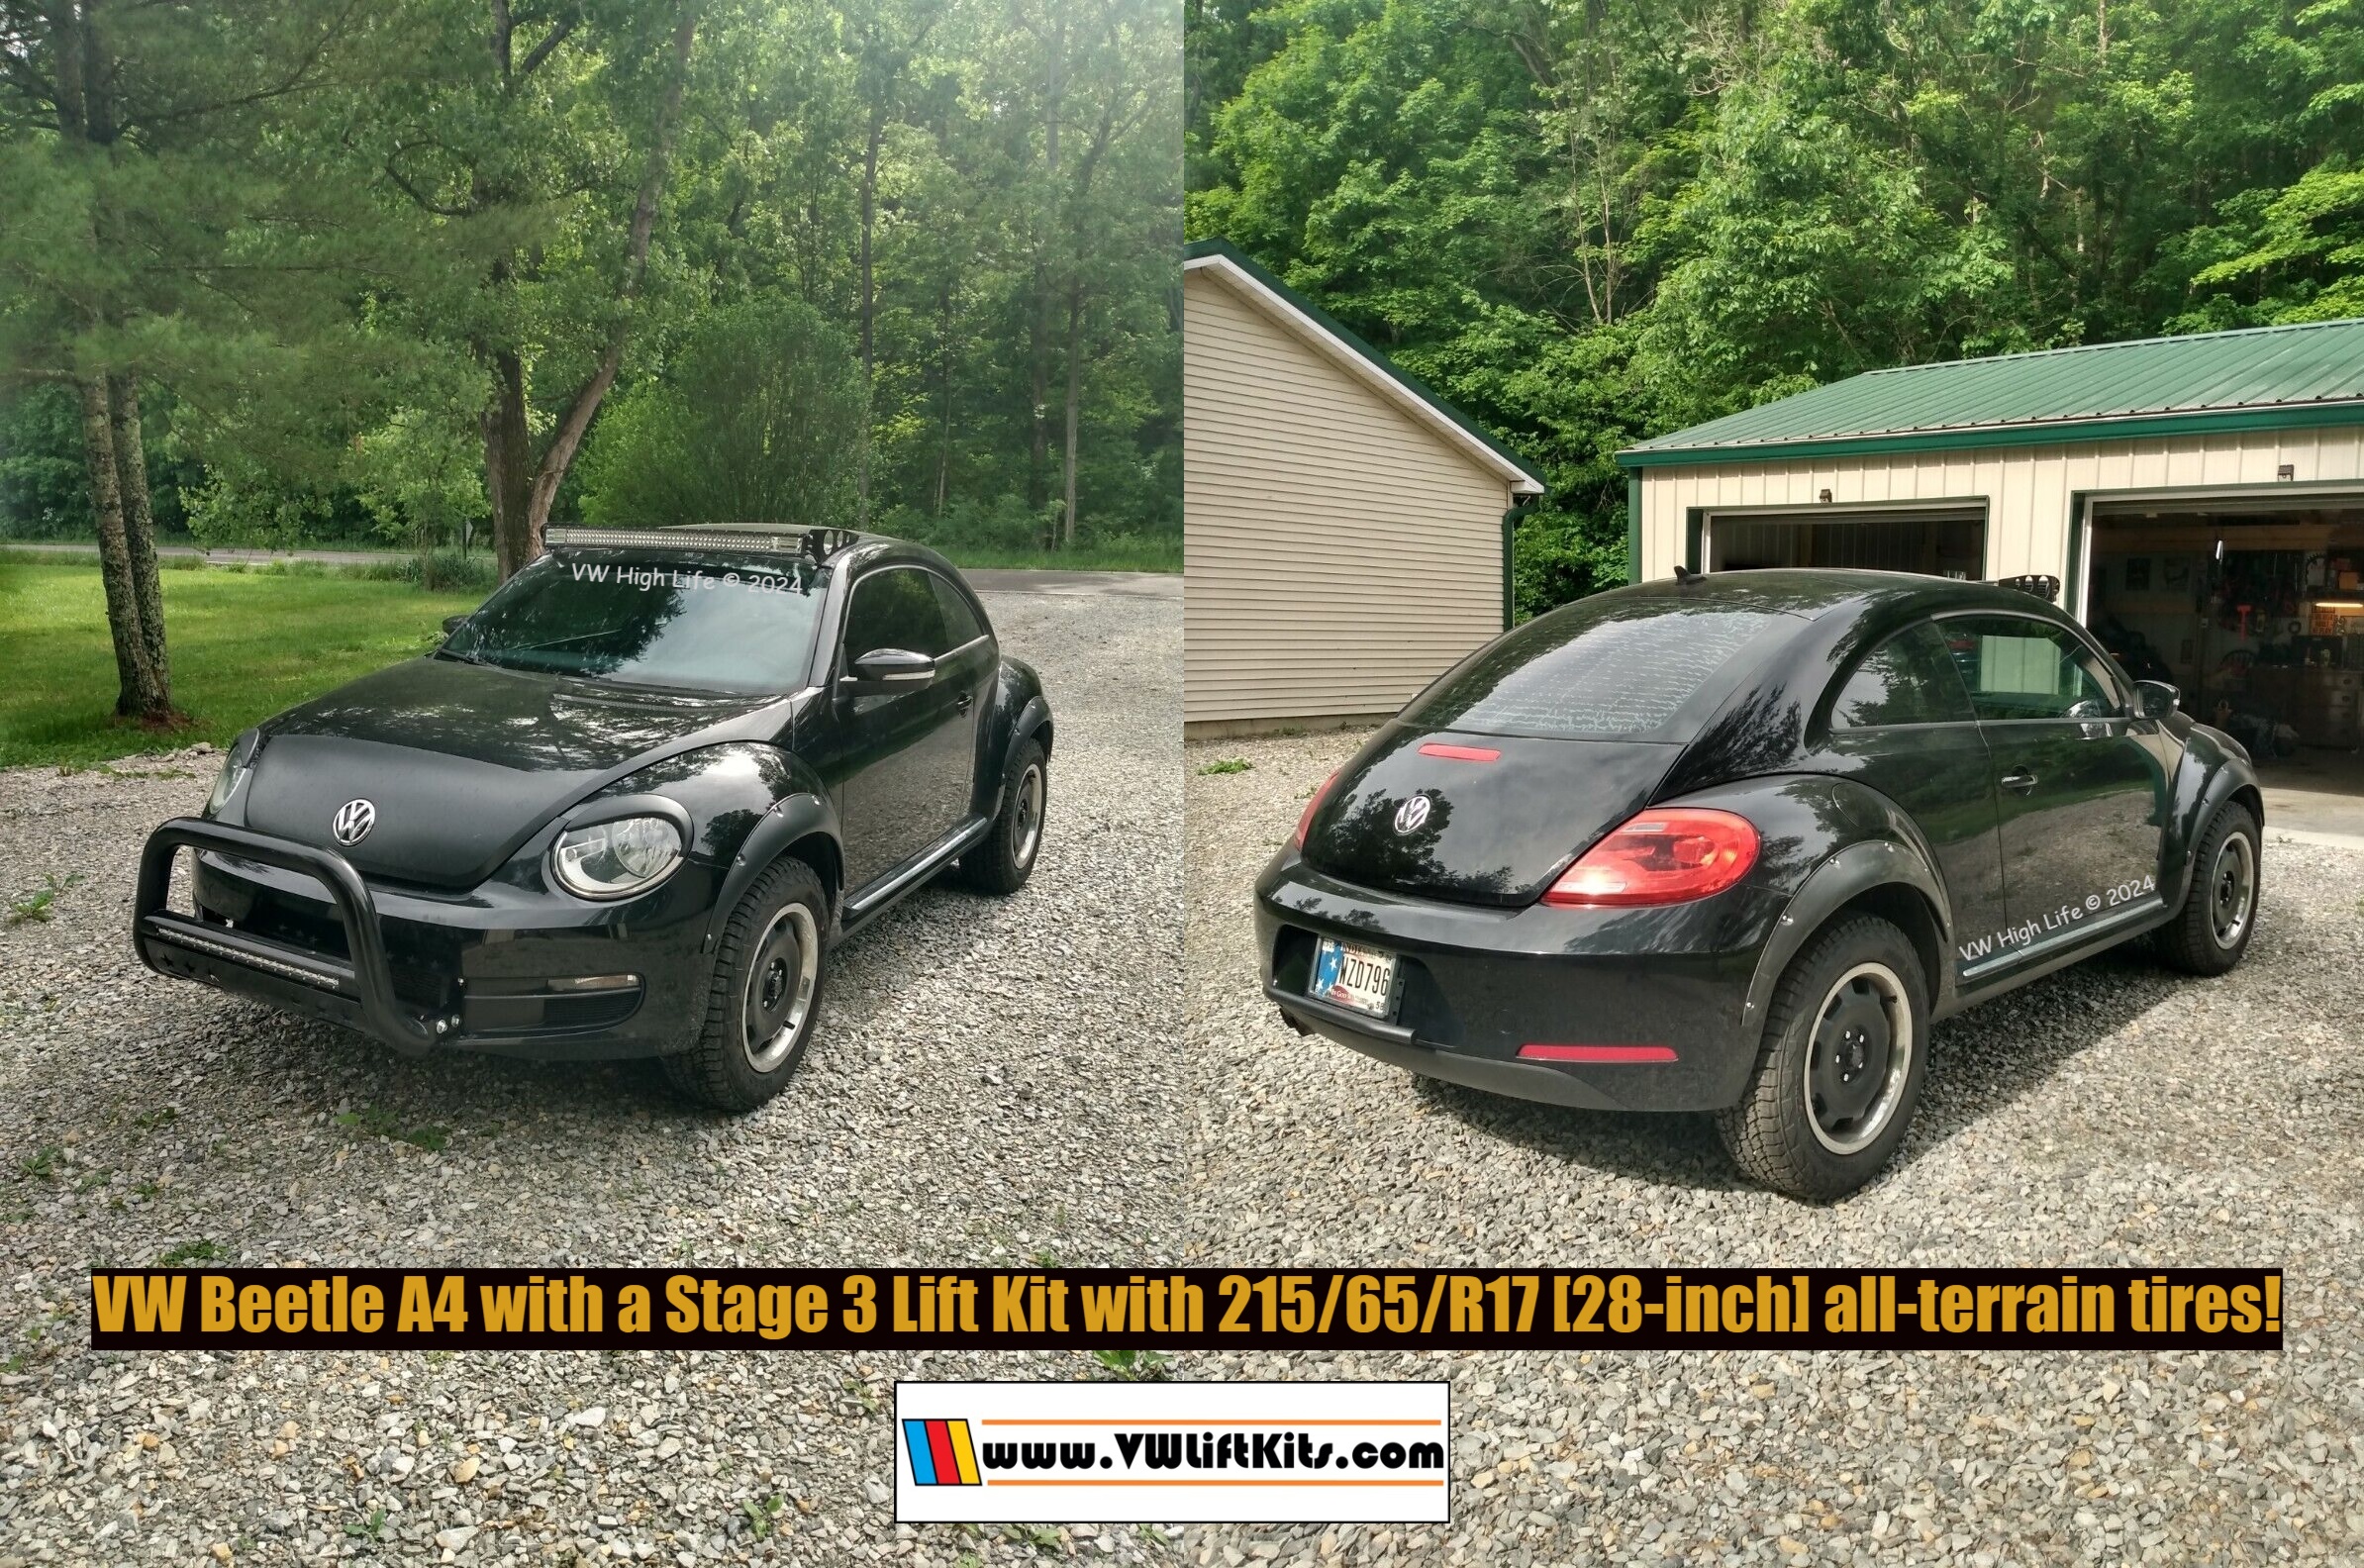 Joshua lifted his Beetle A5 with a Stage 3 Lift Kit with Bilsteins and mounted 28-inch all-terrain tires!